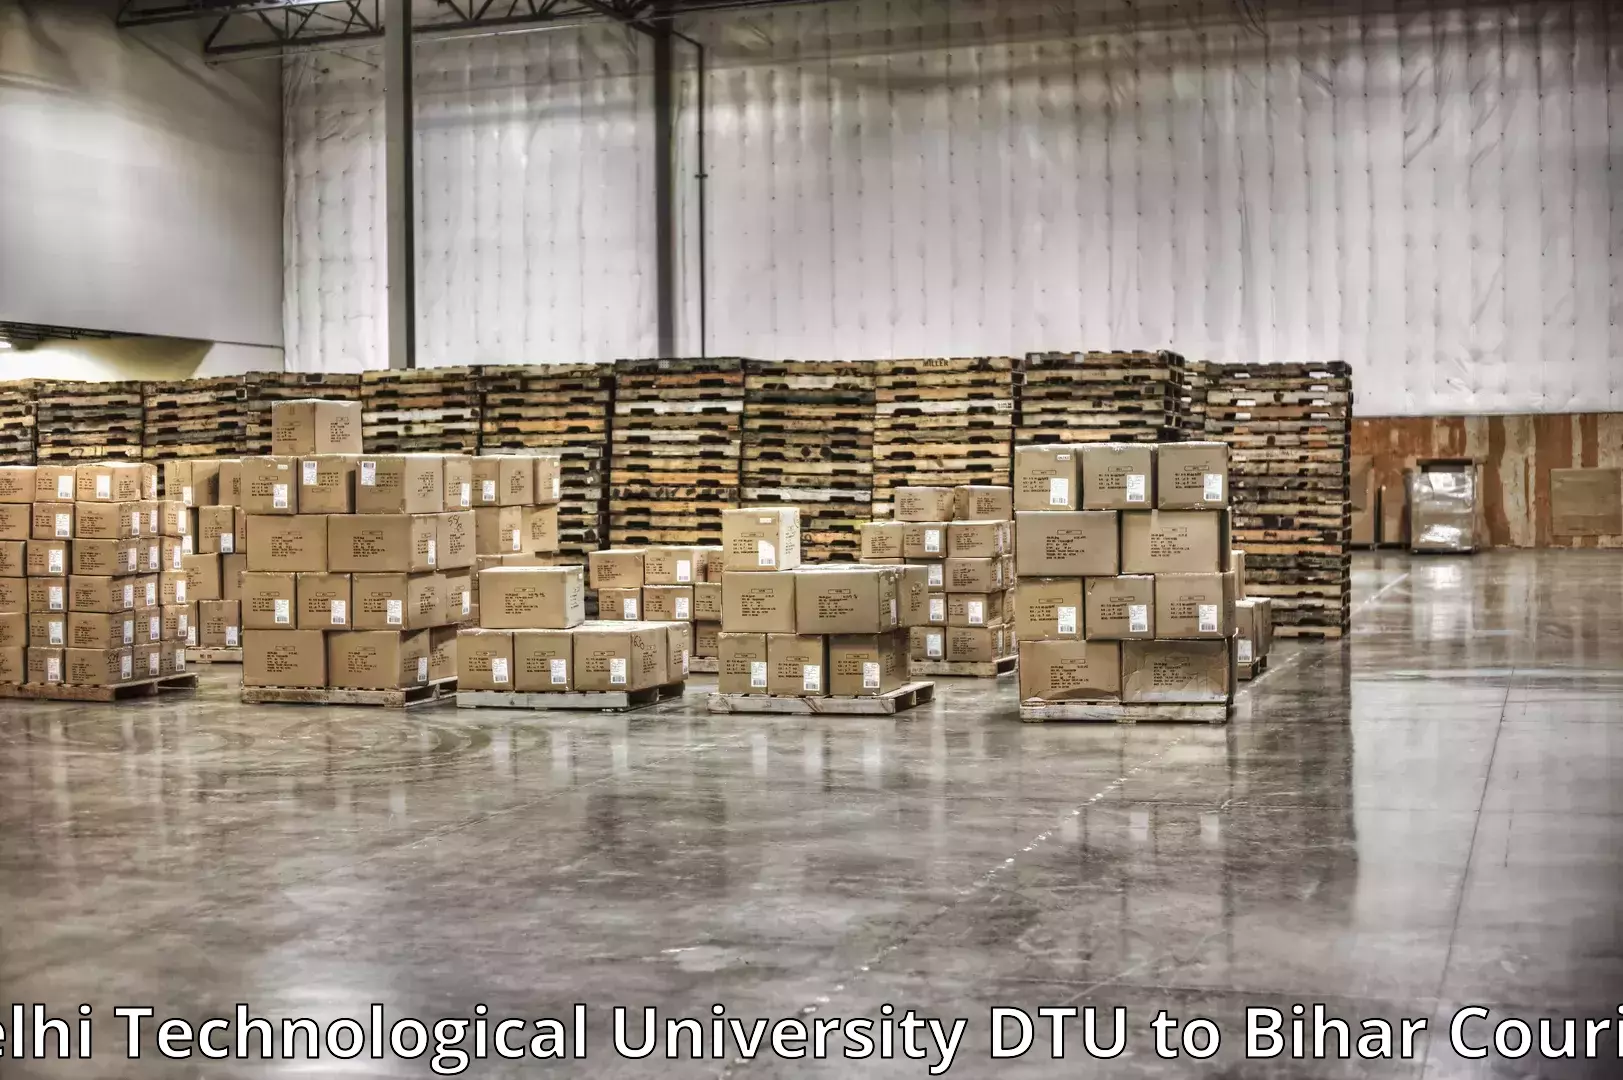 Dependable moving services in Delhi Technological University DTU to Bihar